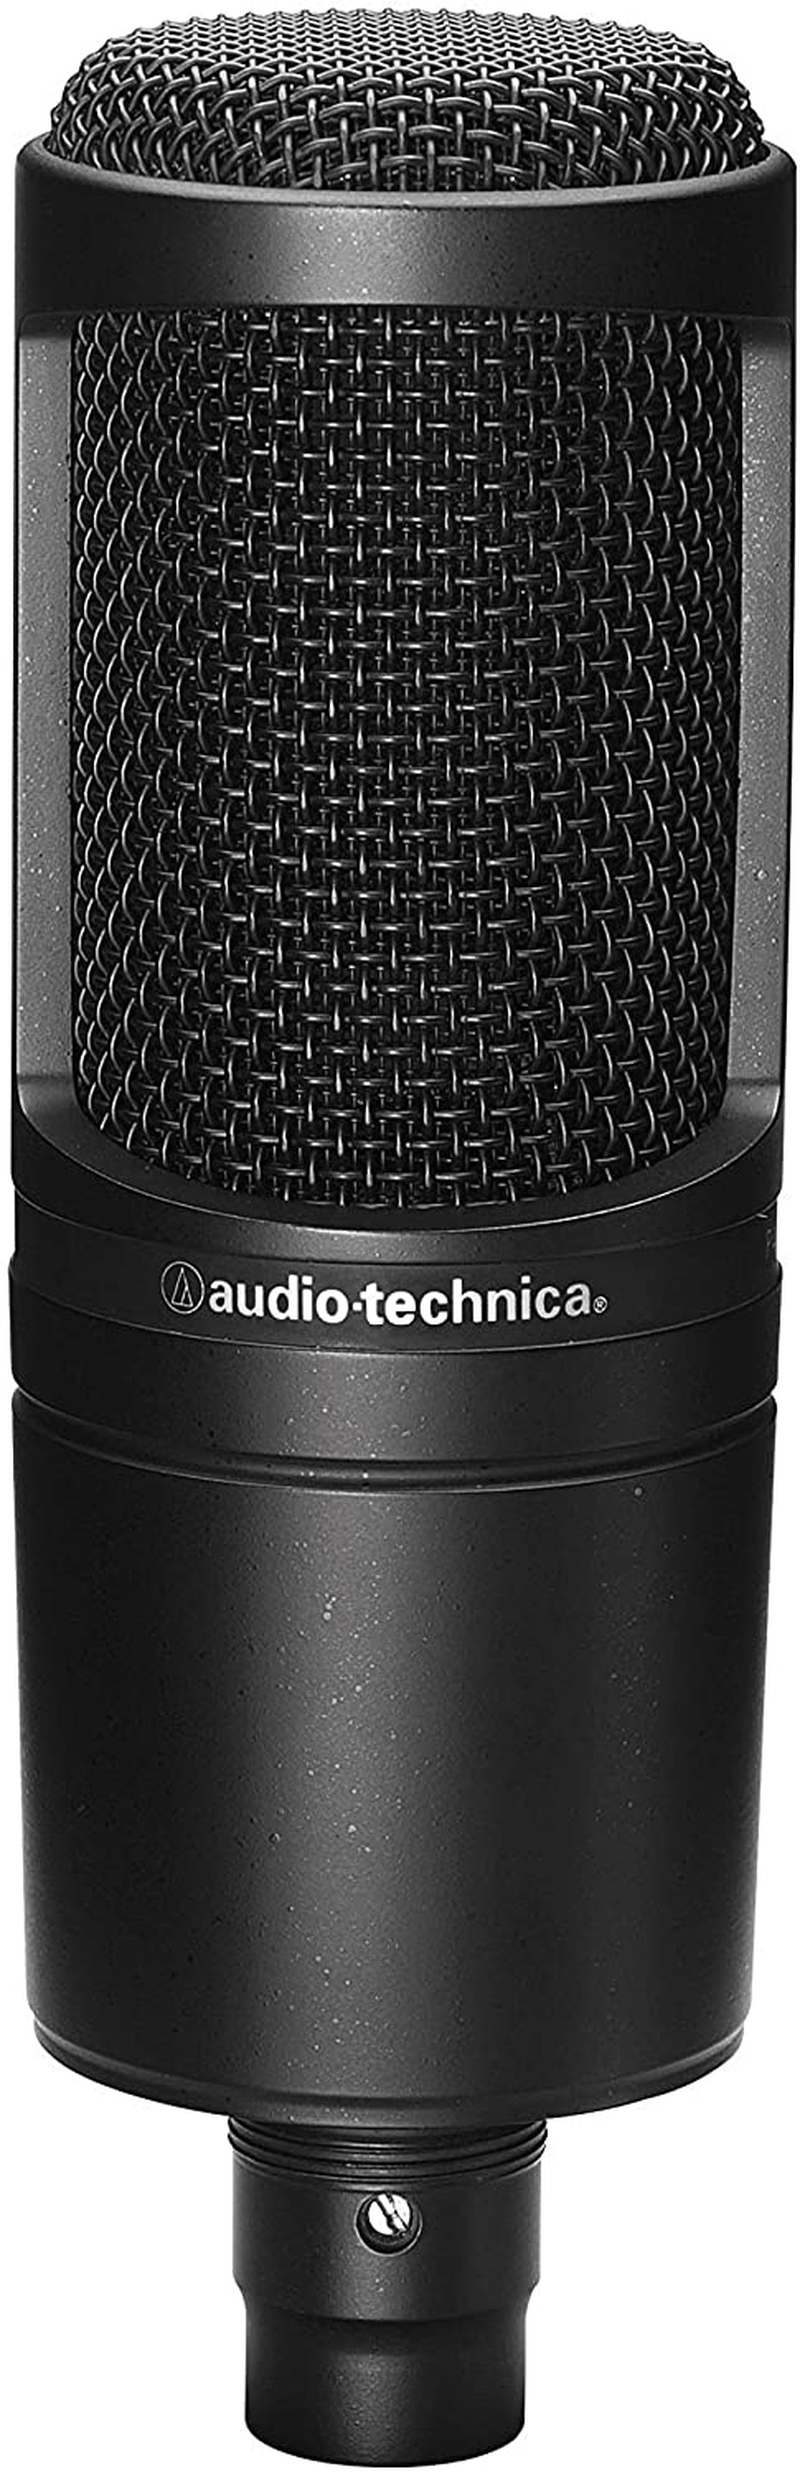 Audio-Technica AT2020 Cardioid Condenser Studio XLR Microphone, Ideal for Project/Home Studio Applications